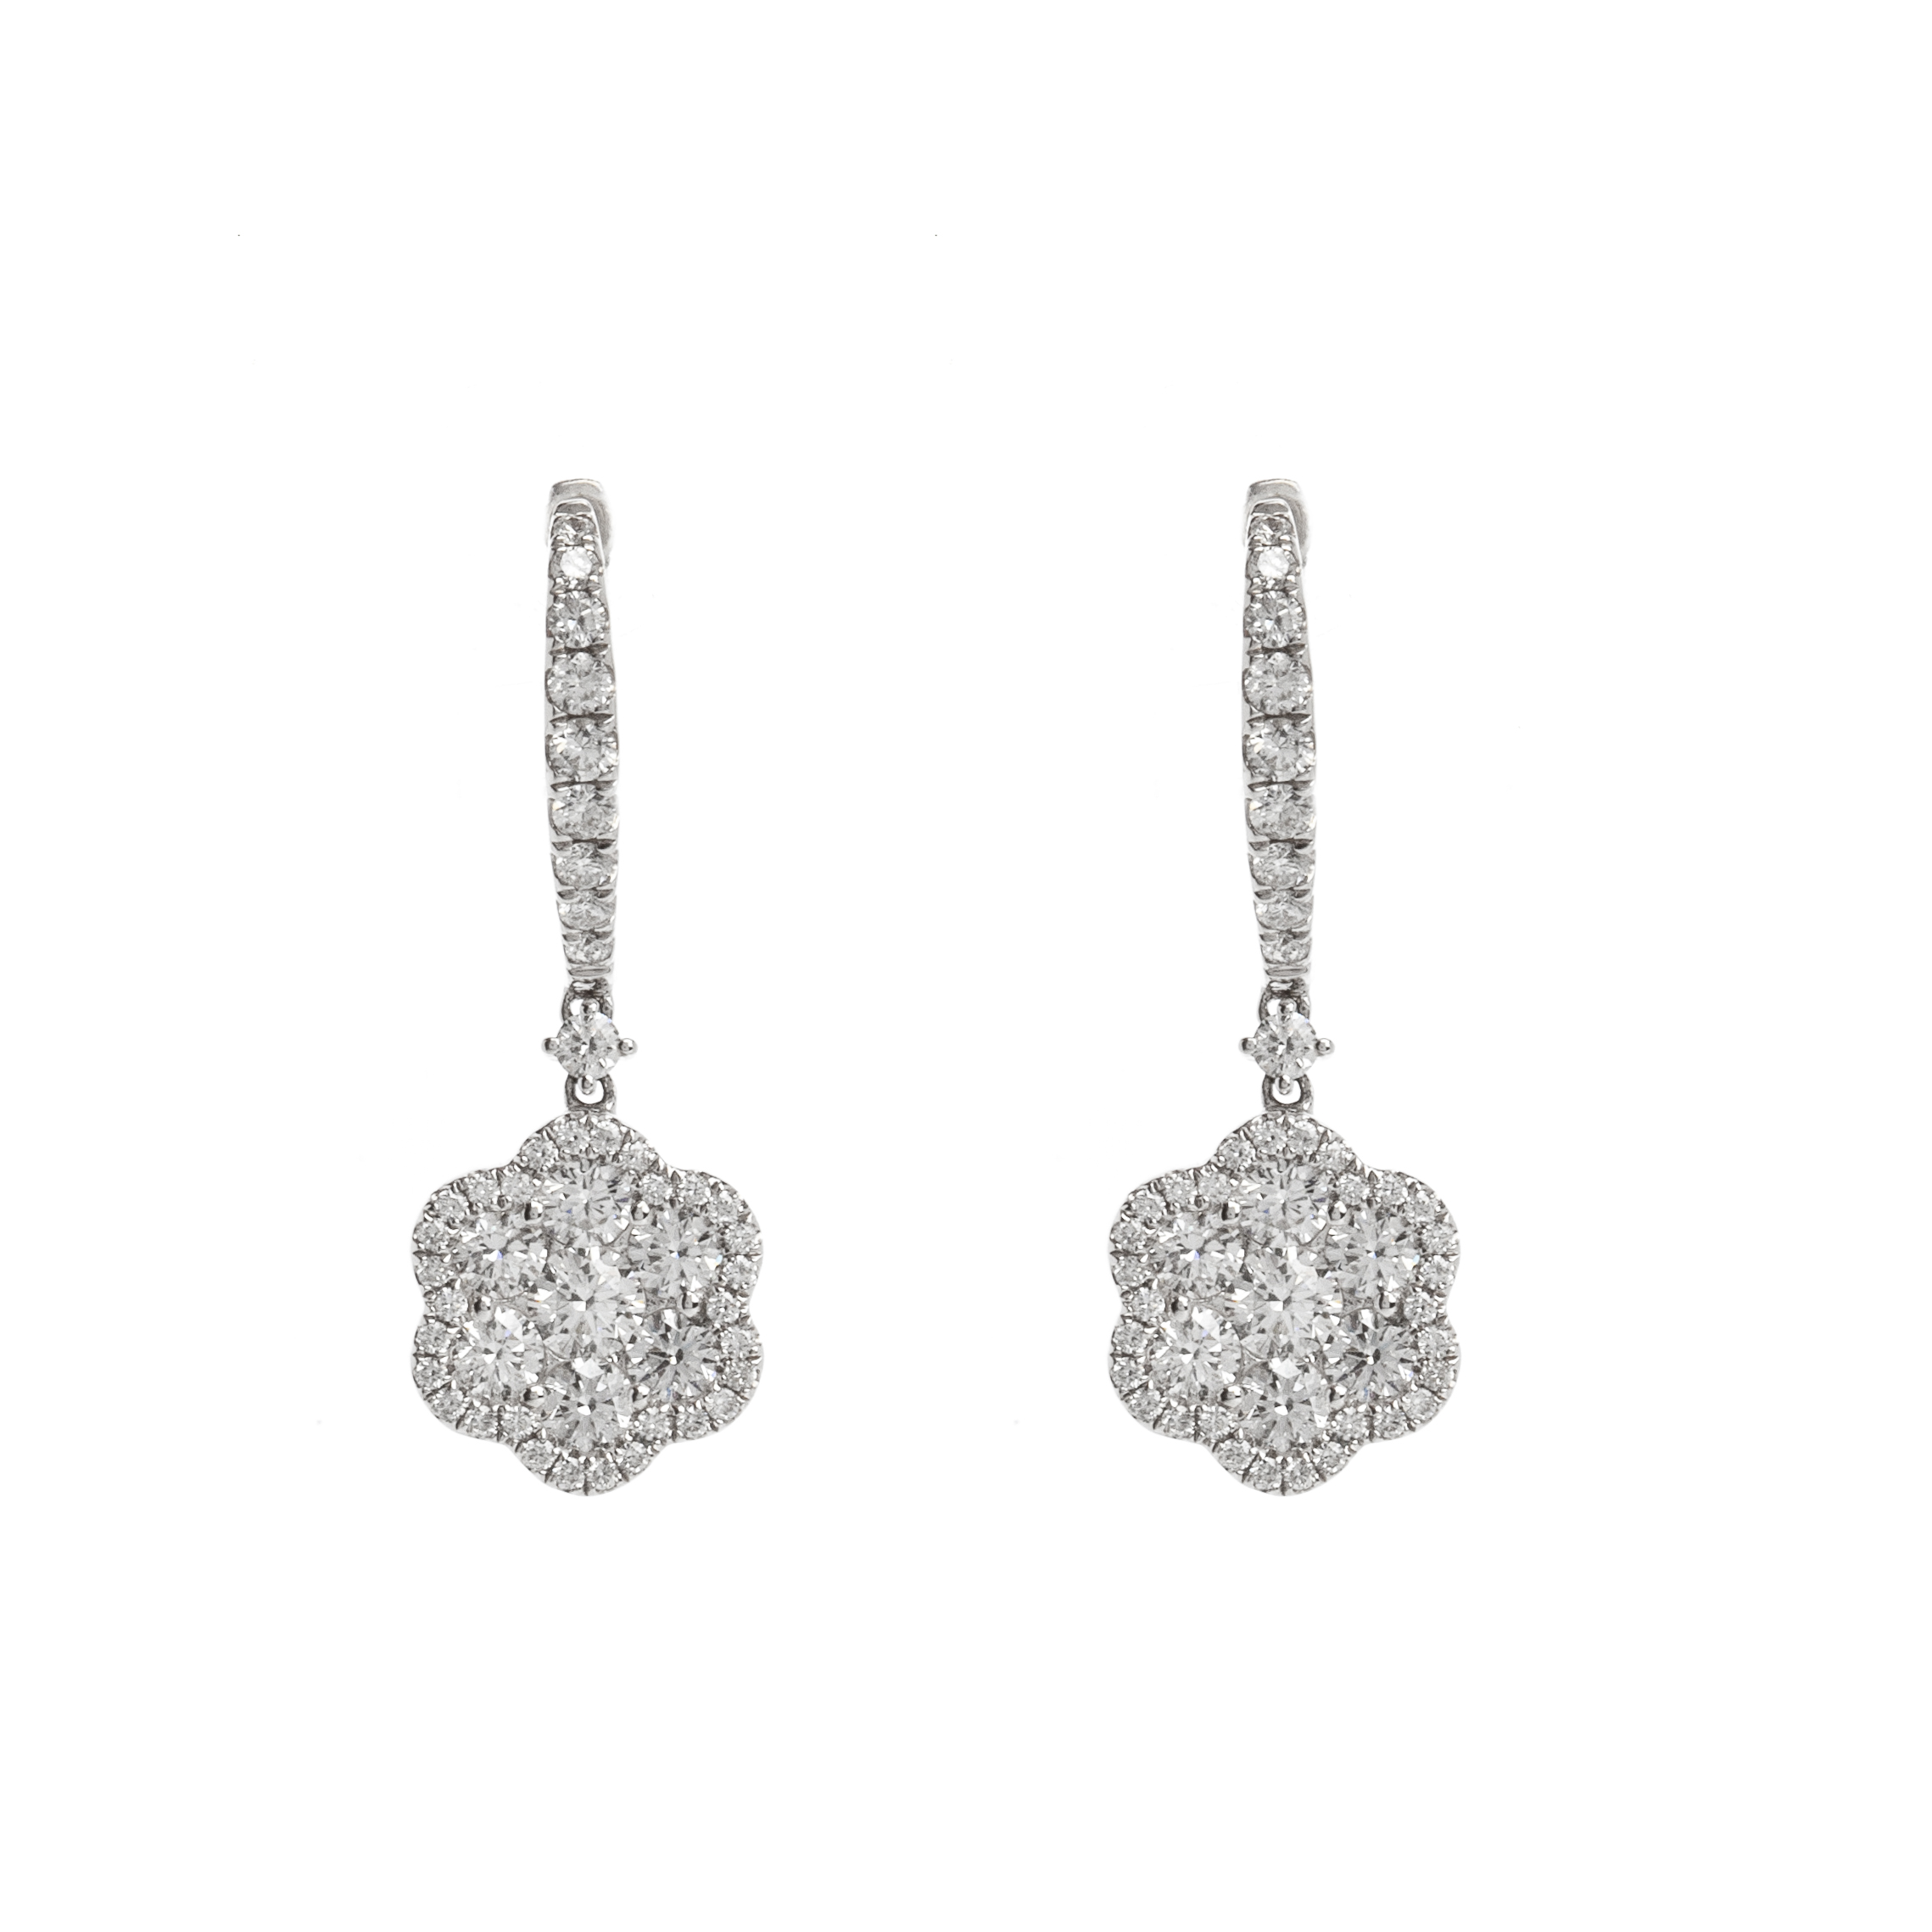 White Gold Flower Drop Earrings with Diamonds (1.93ct)